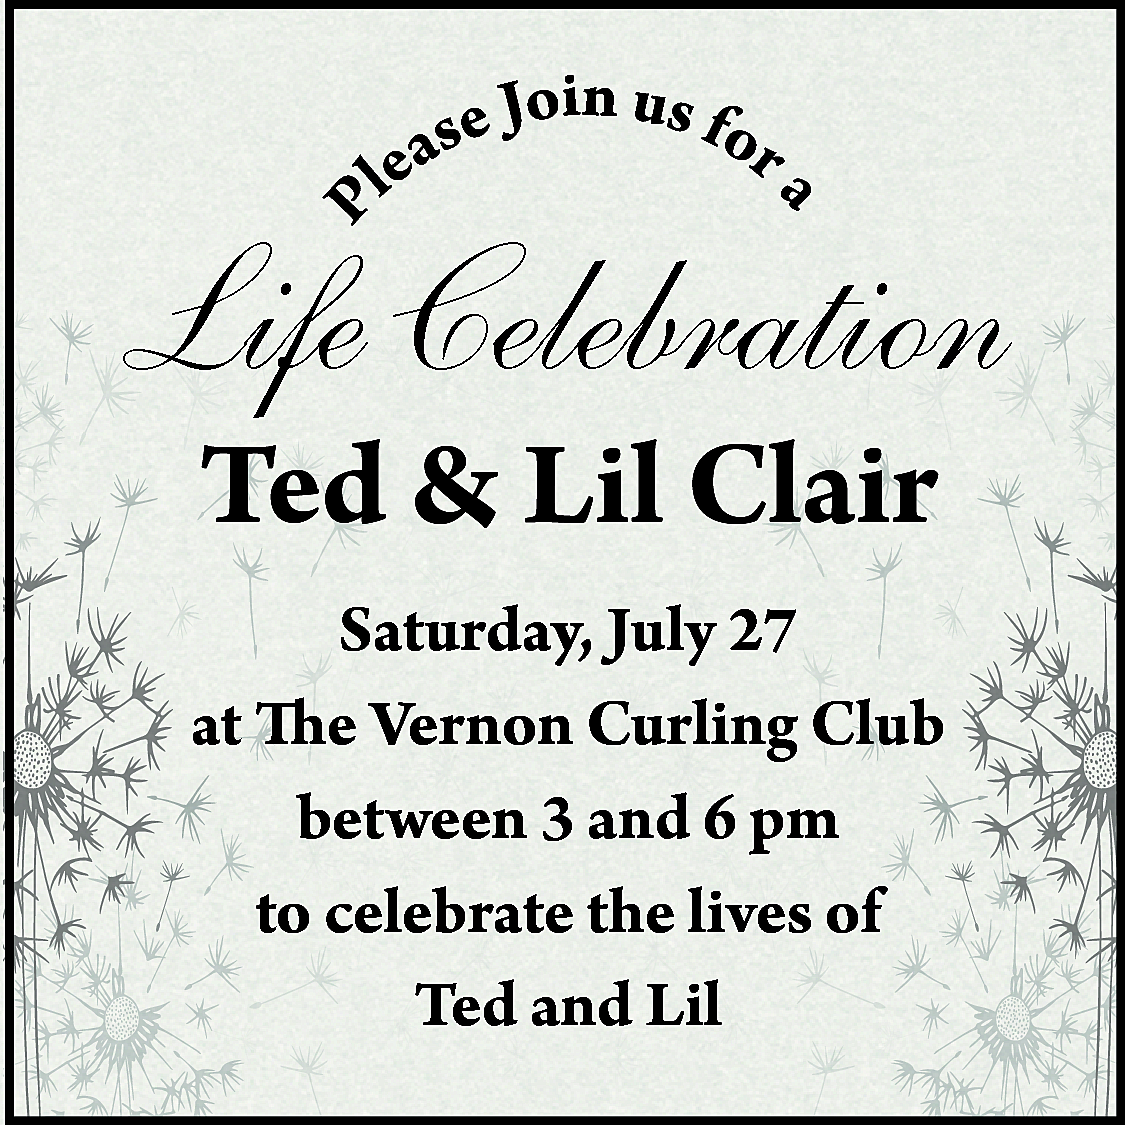 P <br> <br>a <br> <br>in  P    a    in u  se Jo s for  lea    Life Celebration  Ted & Lil Clair    Saturday, July 27  at The Vernon Curling Club  between 3 and 6 pm  to celebrate the lives of  Ted and Lil    